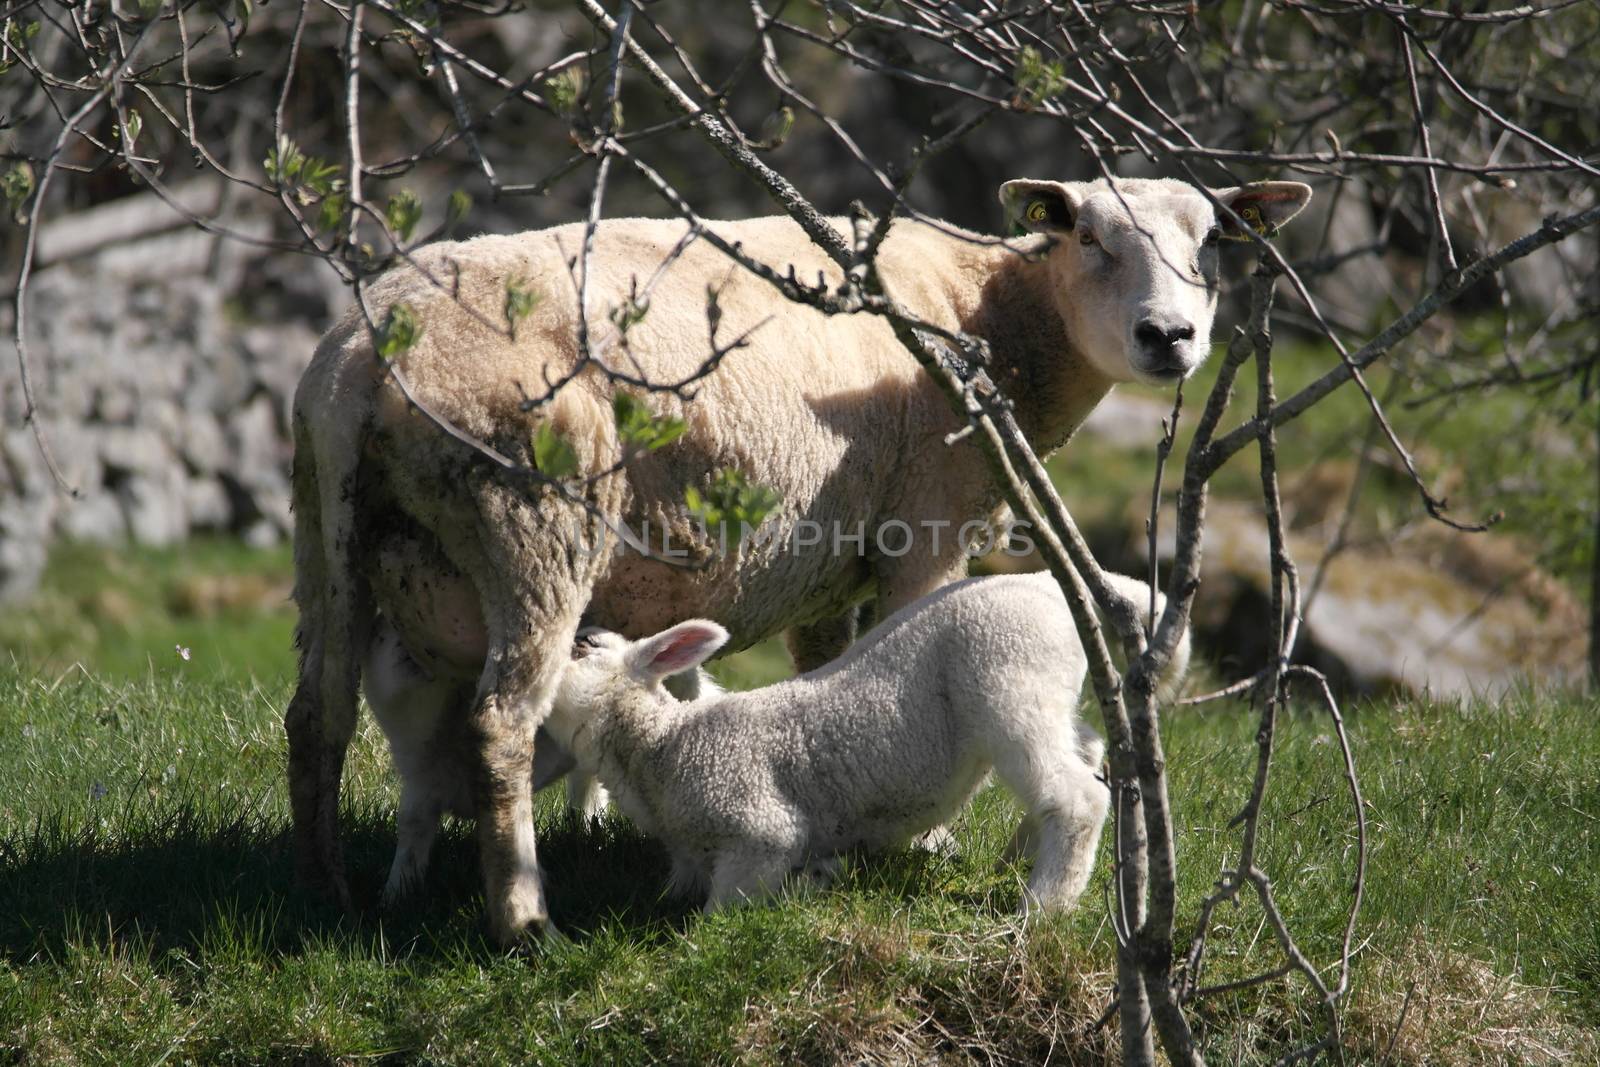 Mother sheep breastfeeding her two lambs.